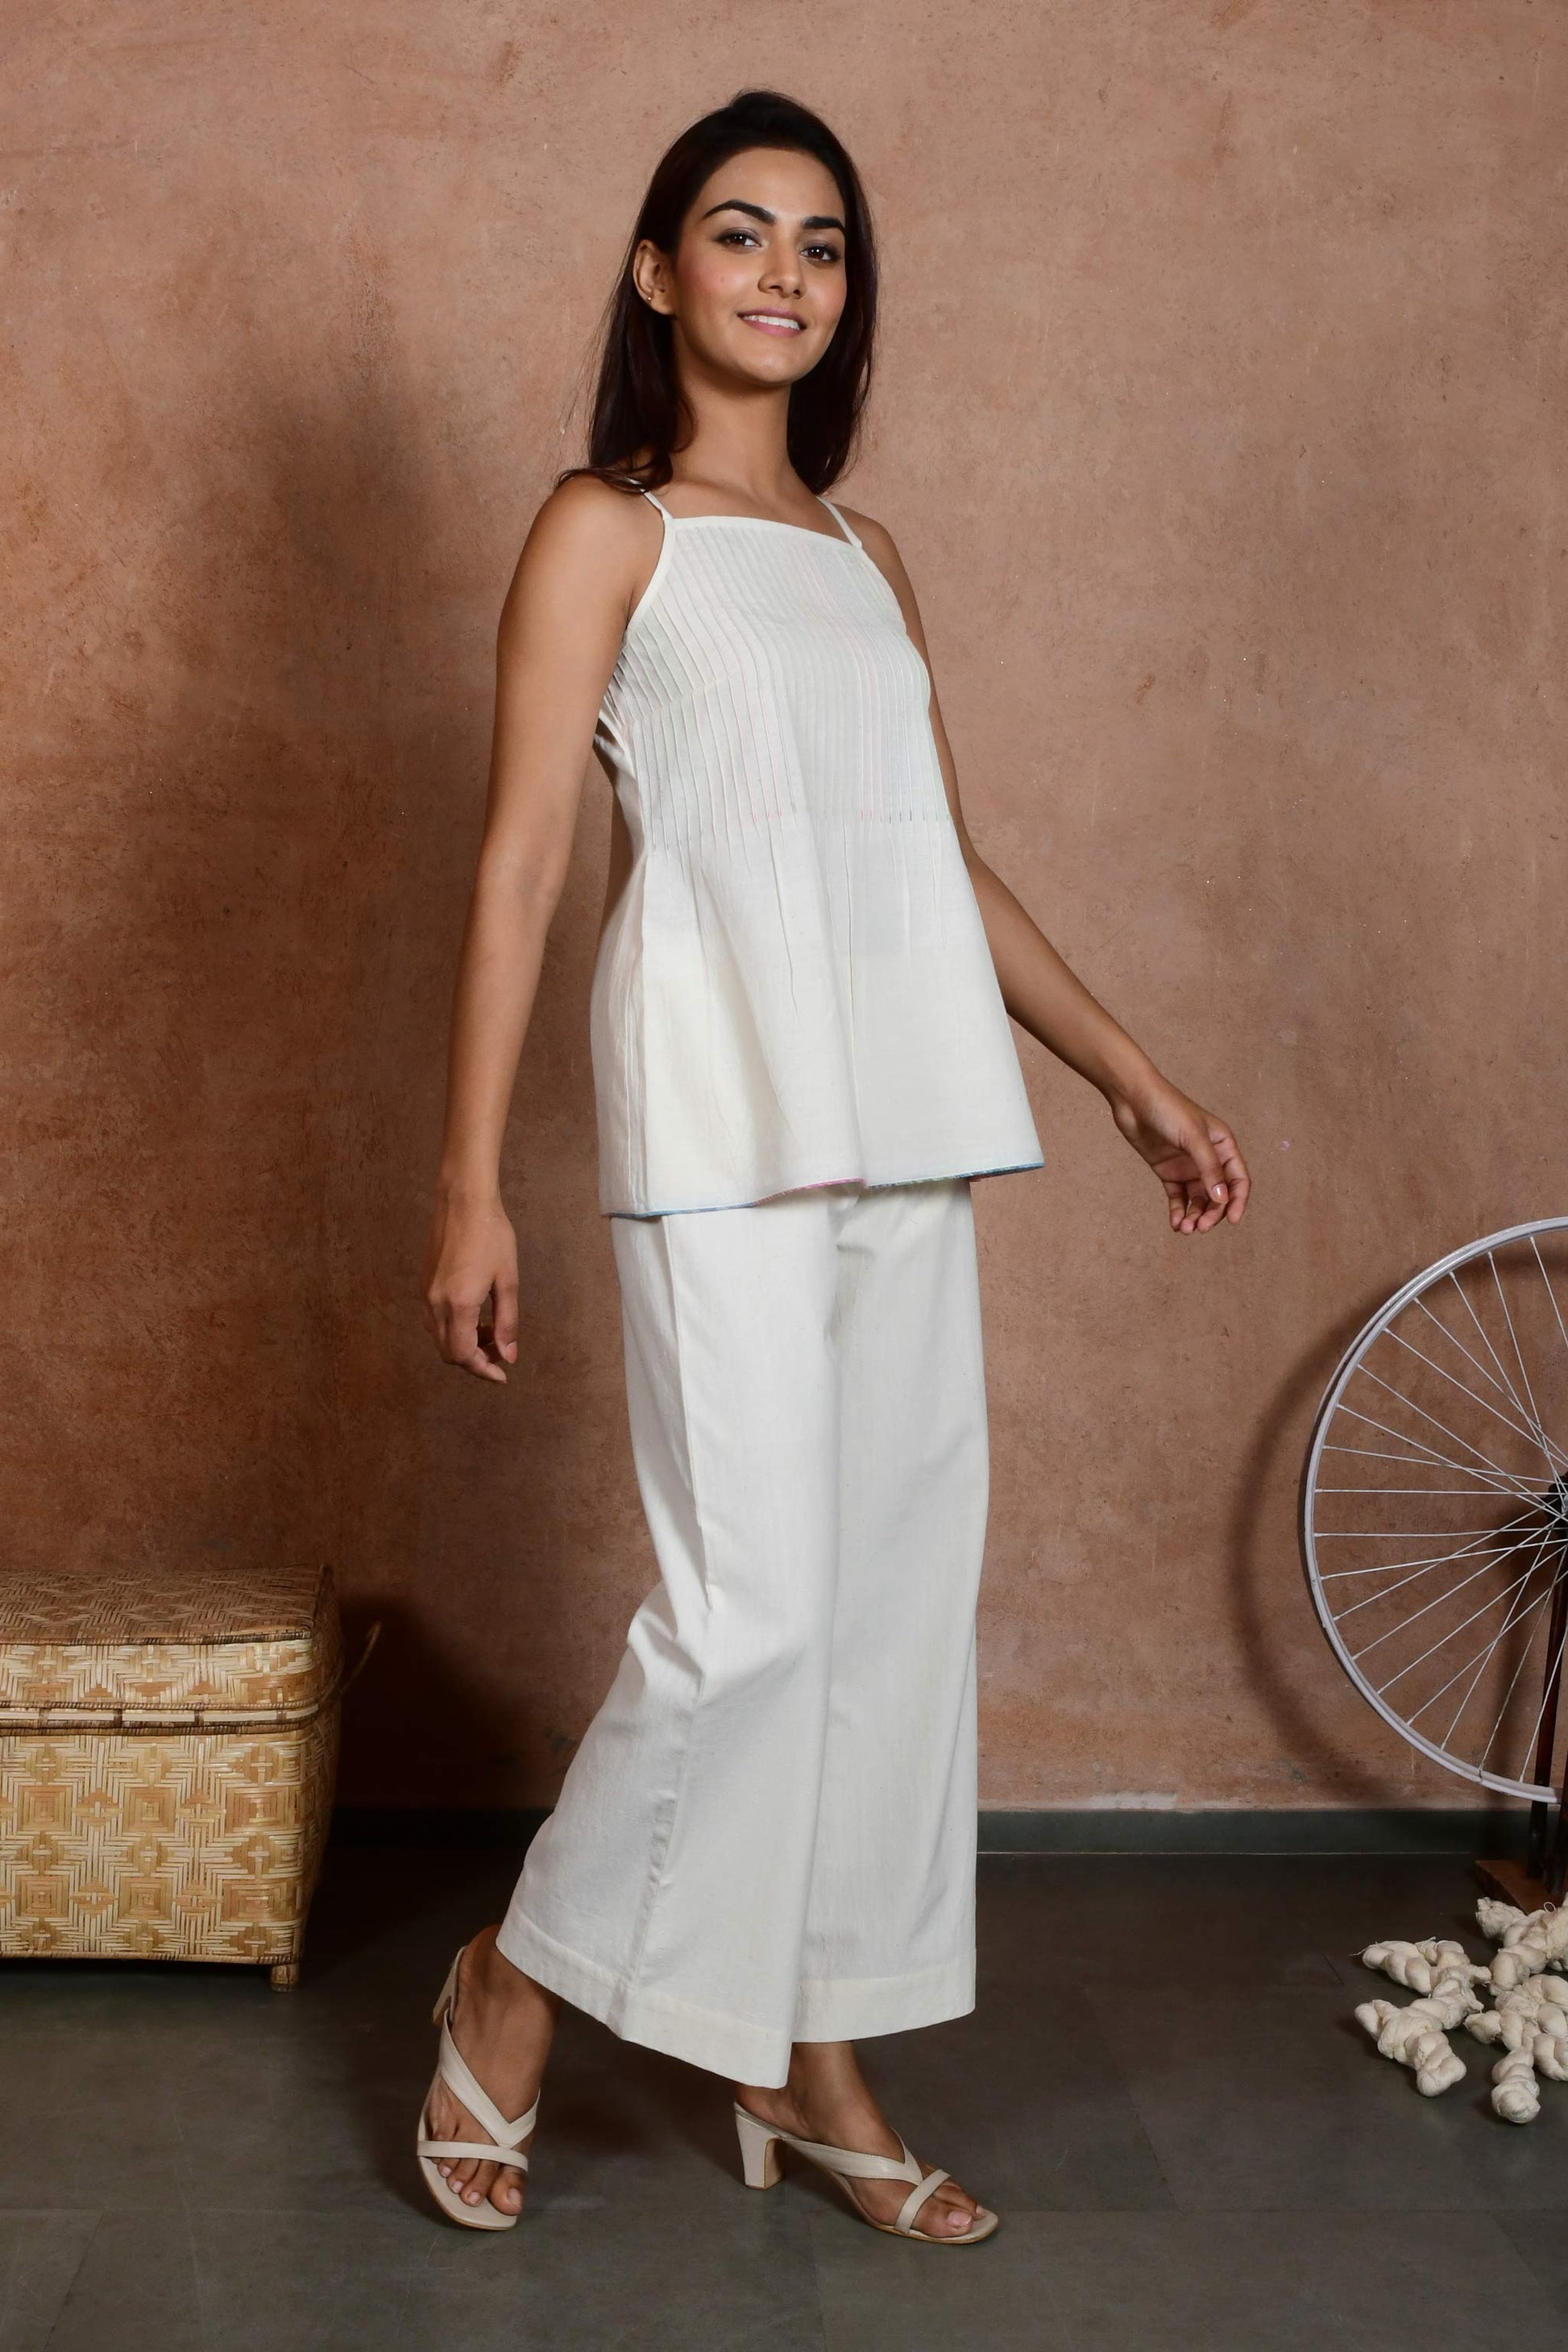 Three quarters pose of an indian model wearing an off white spaghetti top with pin tucks paired with off white straight pants.